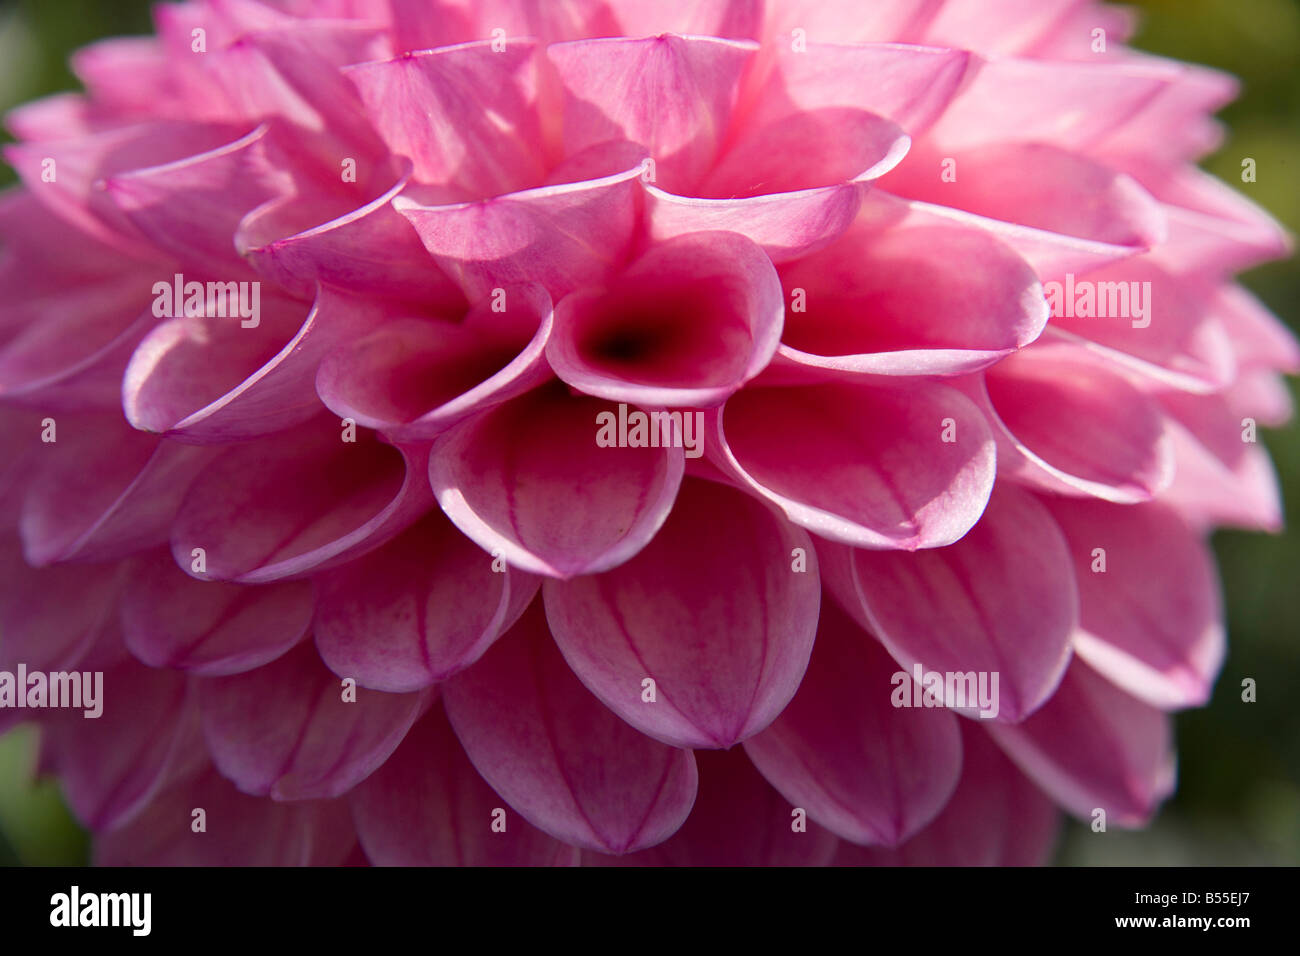 Dahlia pink repeating flower Stock Photo